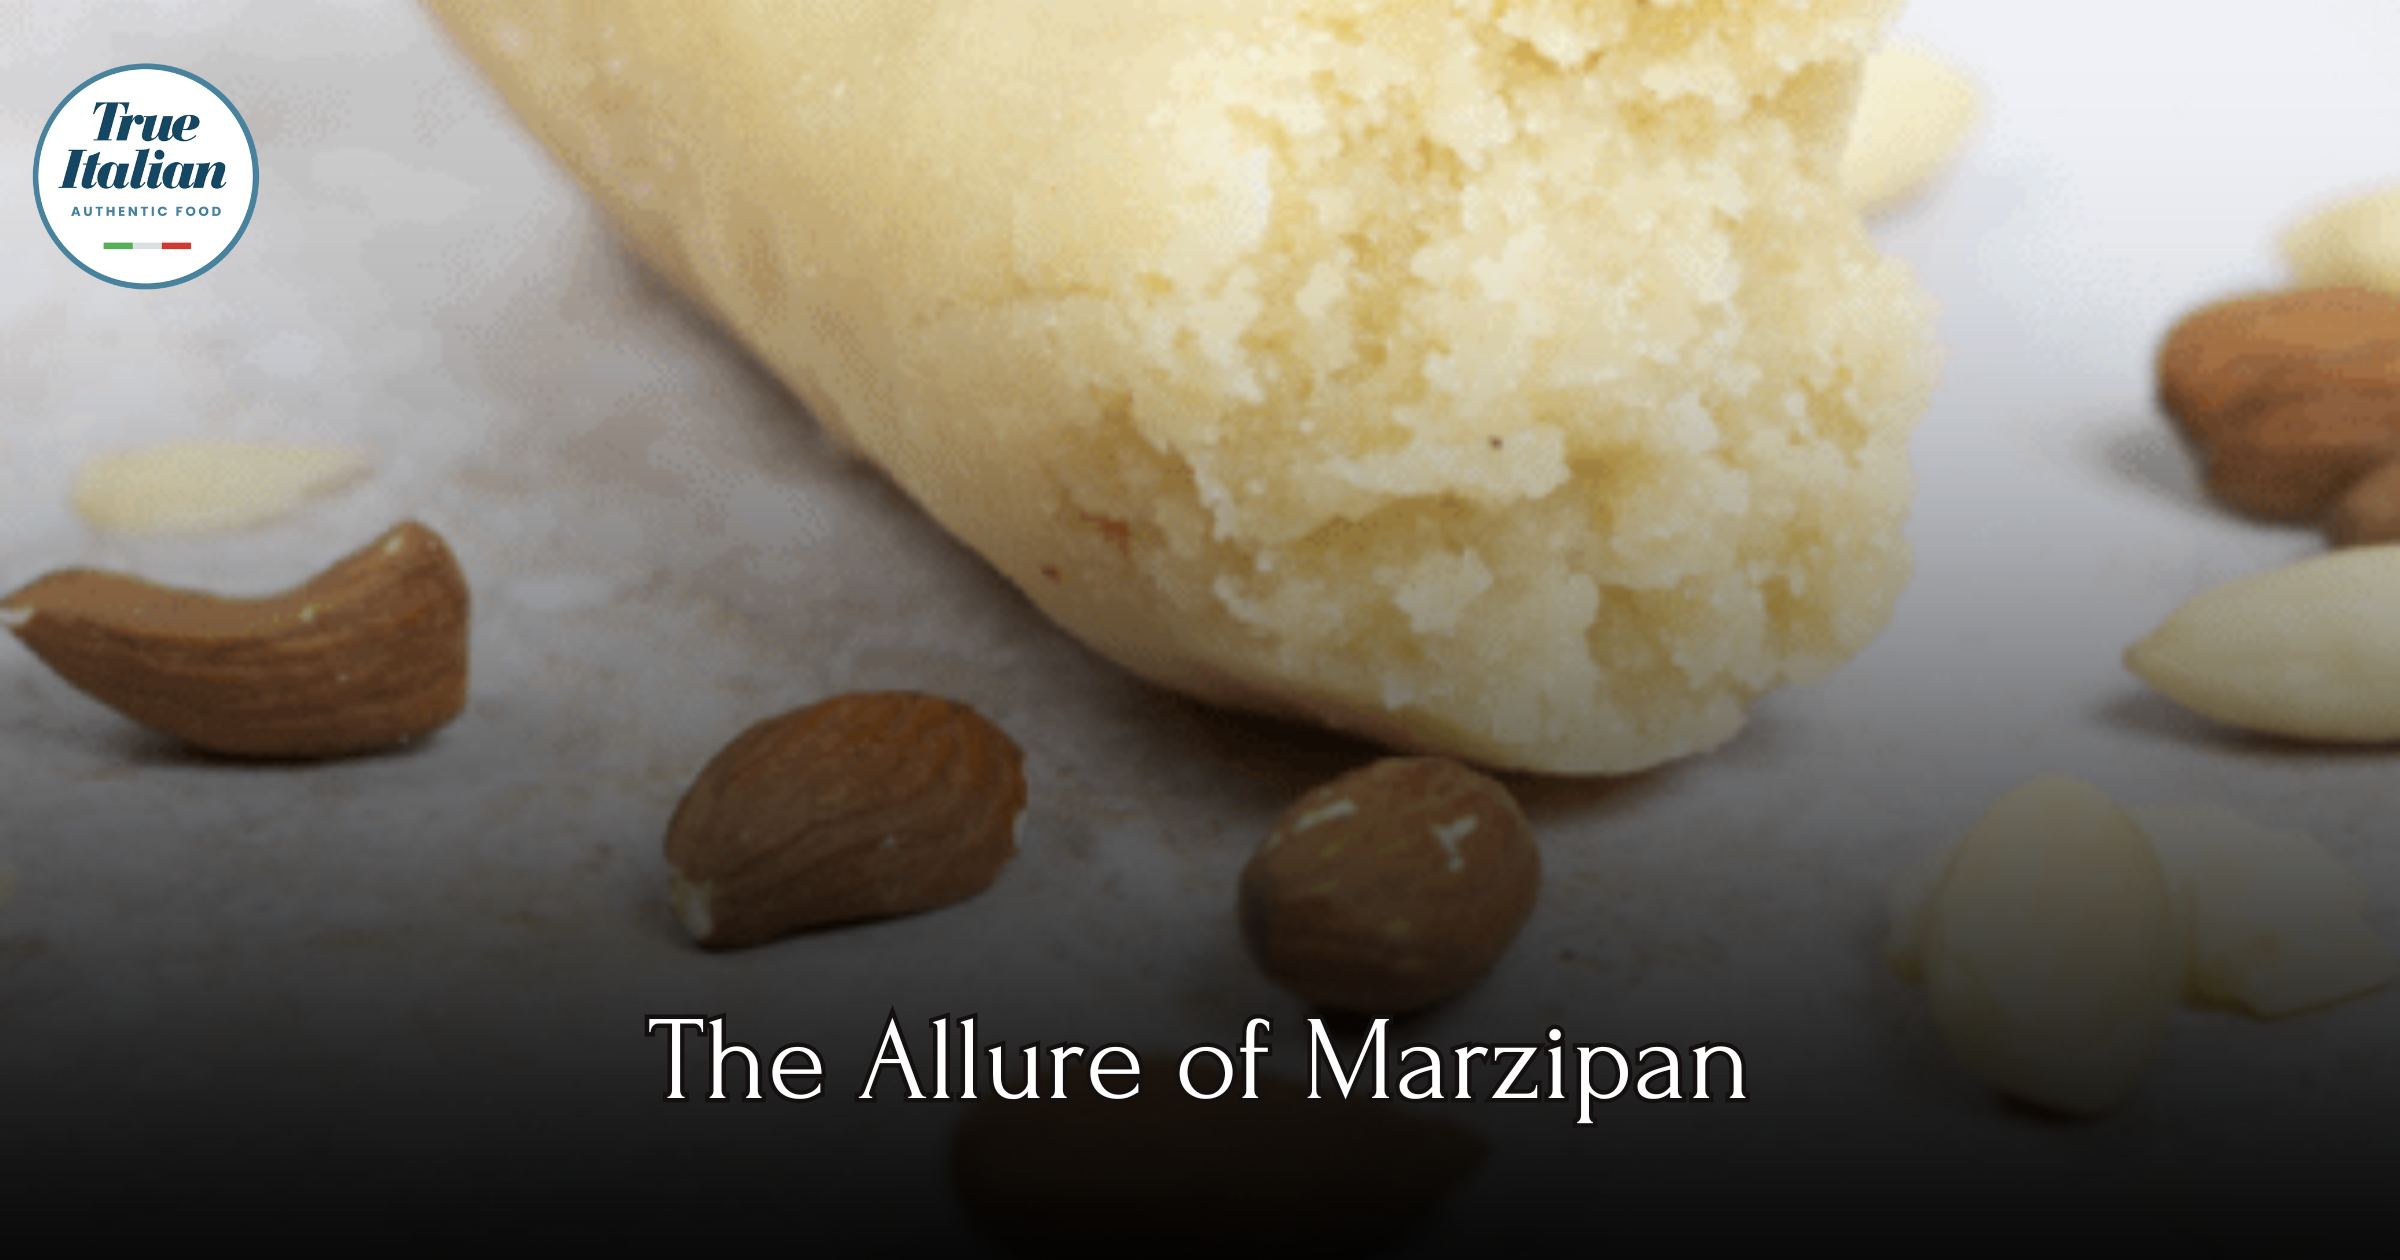 The Allure of Marzipan